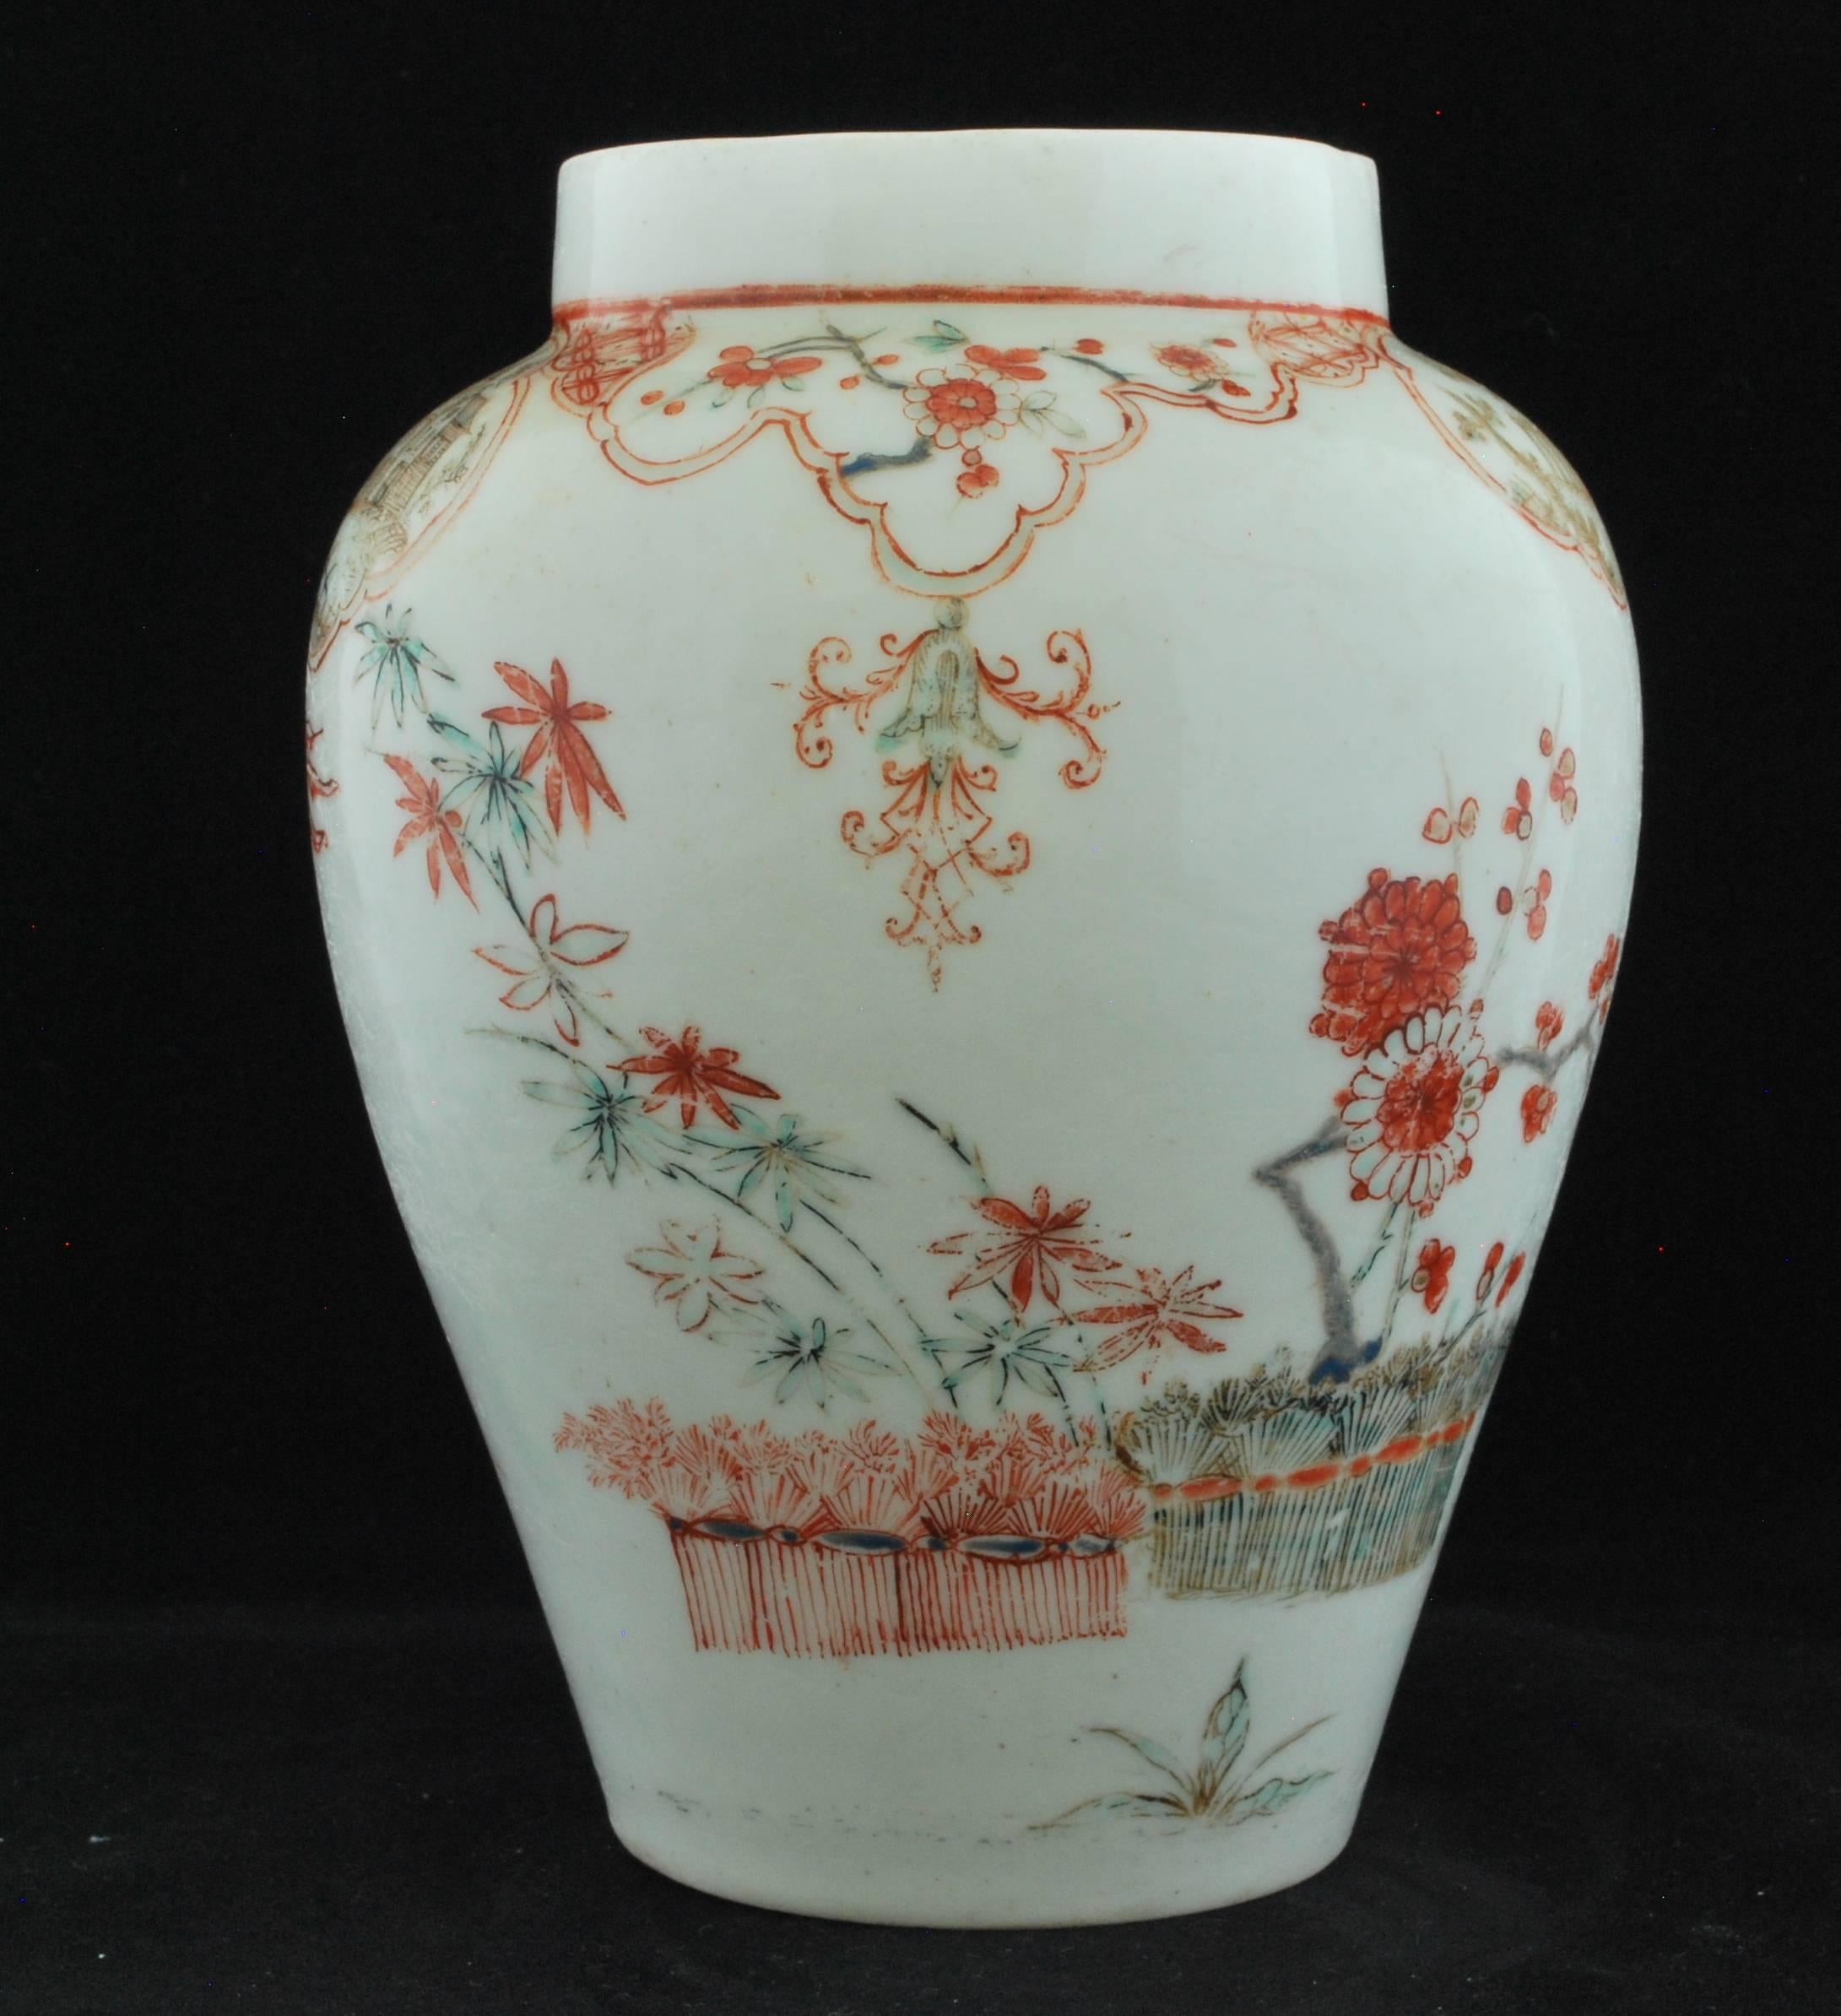 An early example of bow’s output, with a smooth, silky glaze. Painted after the Kakiemon with a phoenix, butterfly and various plants after the Japanese; with reserved panels featuring Chinese landscapes painted in a delicate sepia.

Provenance: